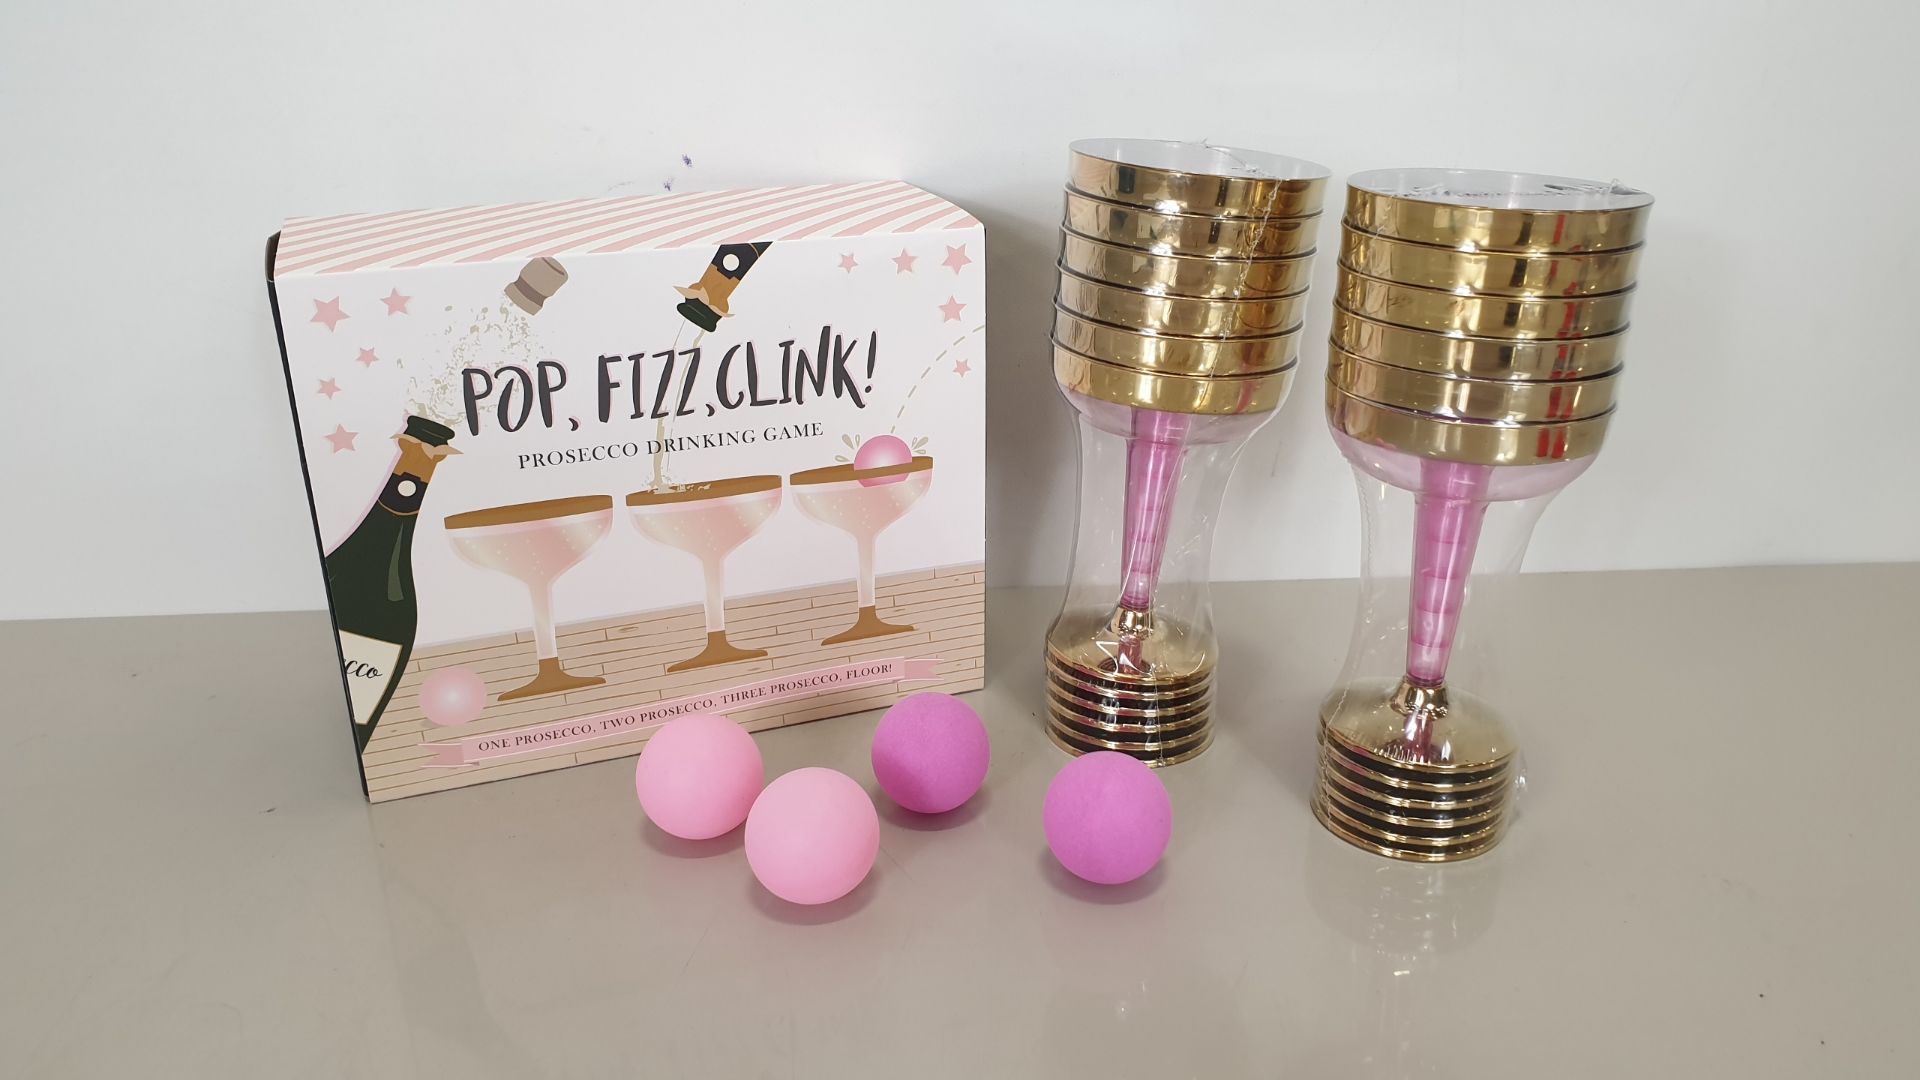 30 X BRAND NEW POP FIZZ CLINK PROSECCO DRINKING GAME (INCLUDES 12 PLASTIC PROSECCO GLASSES, 2 PINK